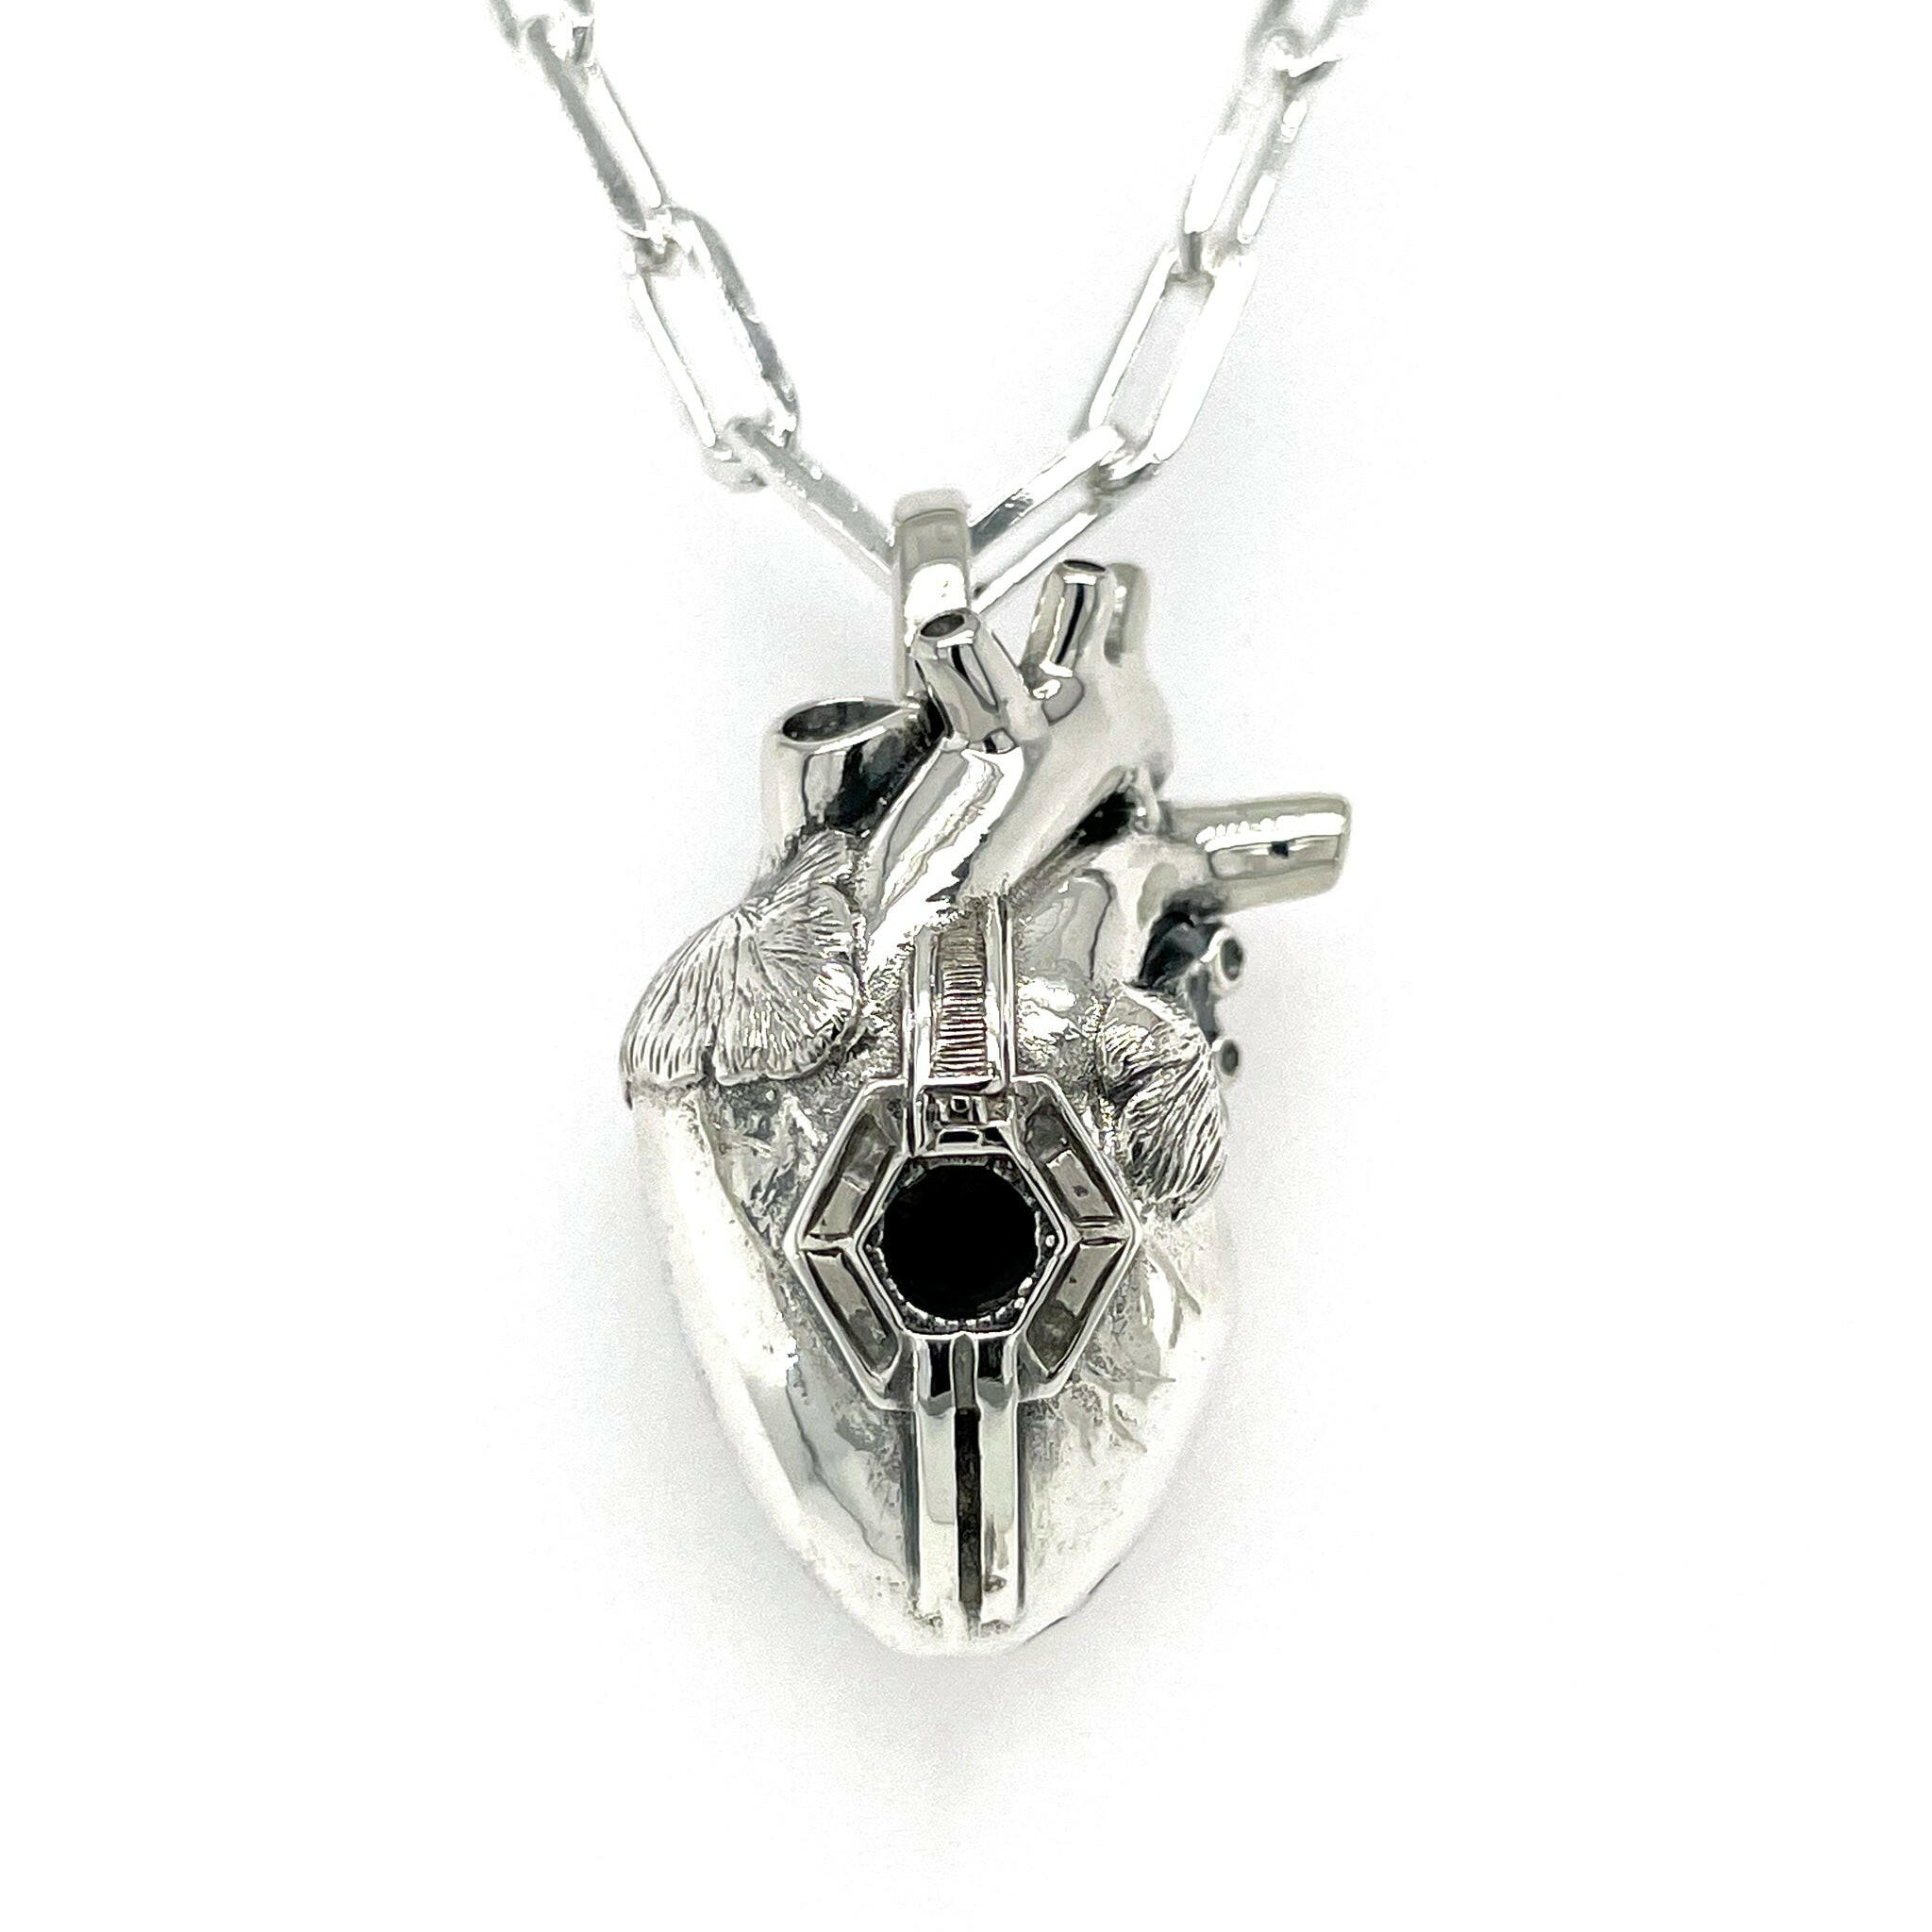 Front view of fatal flaw pendant made of sterling silver , pendant resembles an atomical heart with a hexagonal hole in the center.